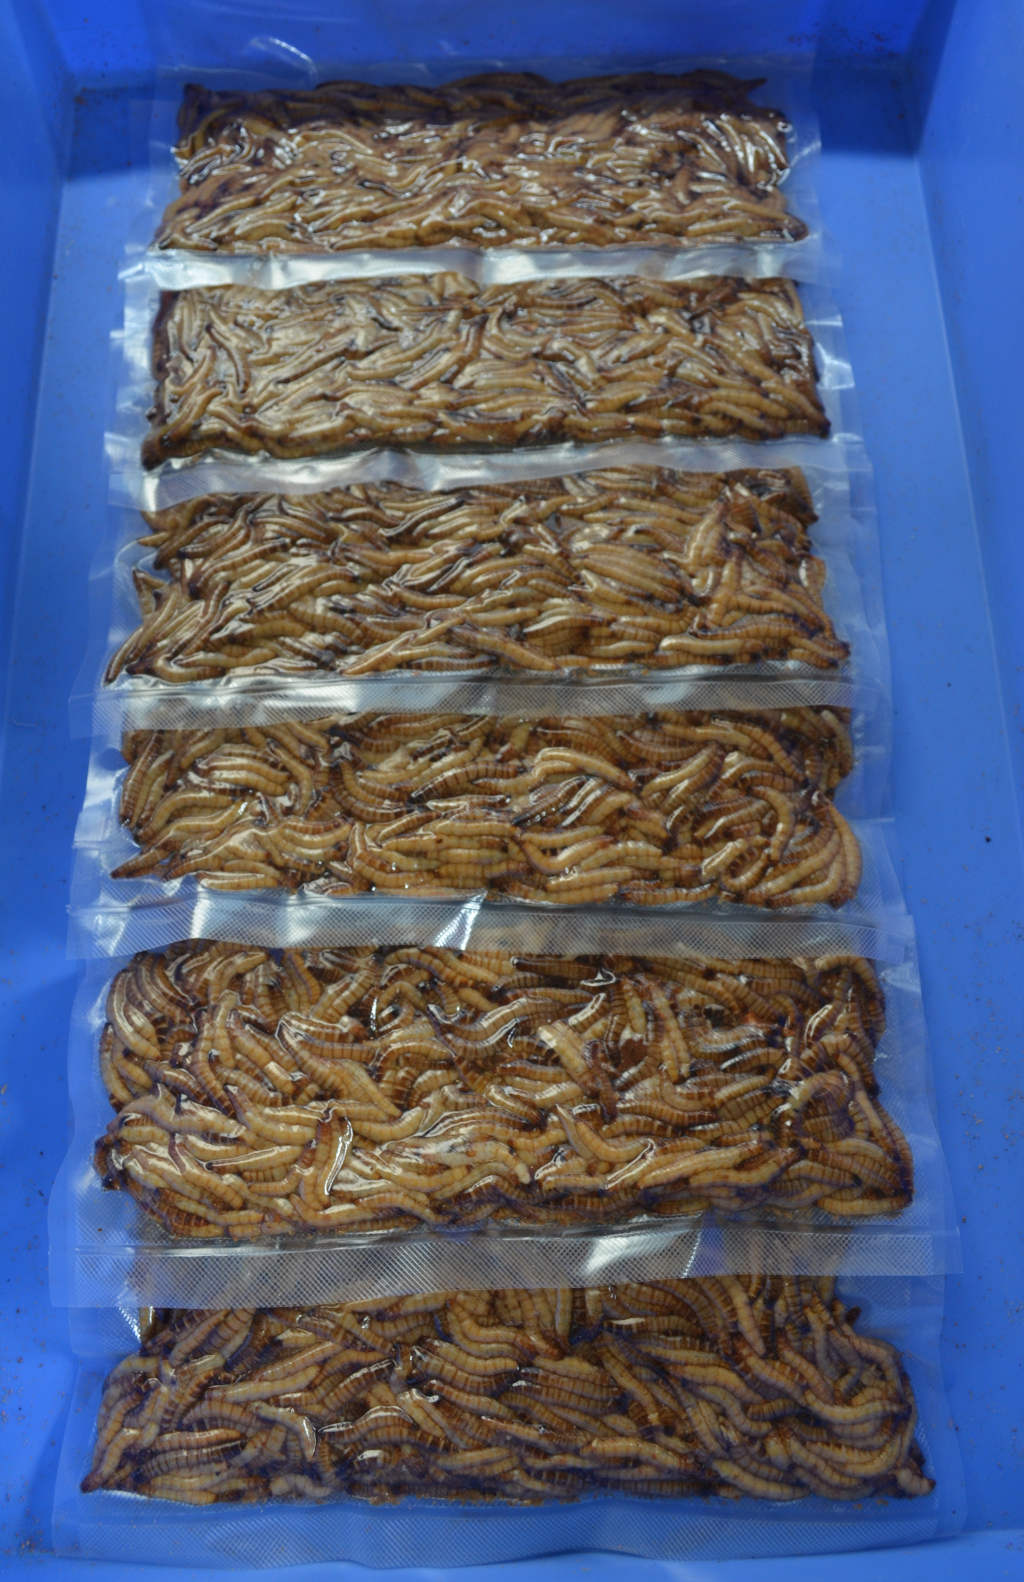 Photo of giant mealworms that have been vacuum sealed in clear bags in a blue tray.